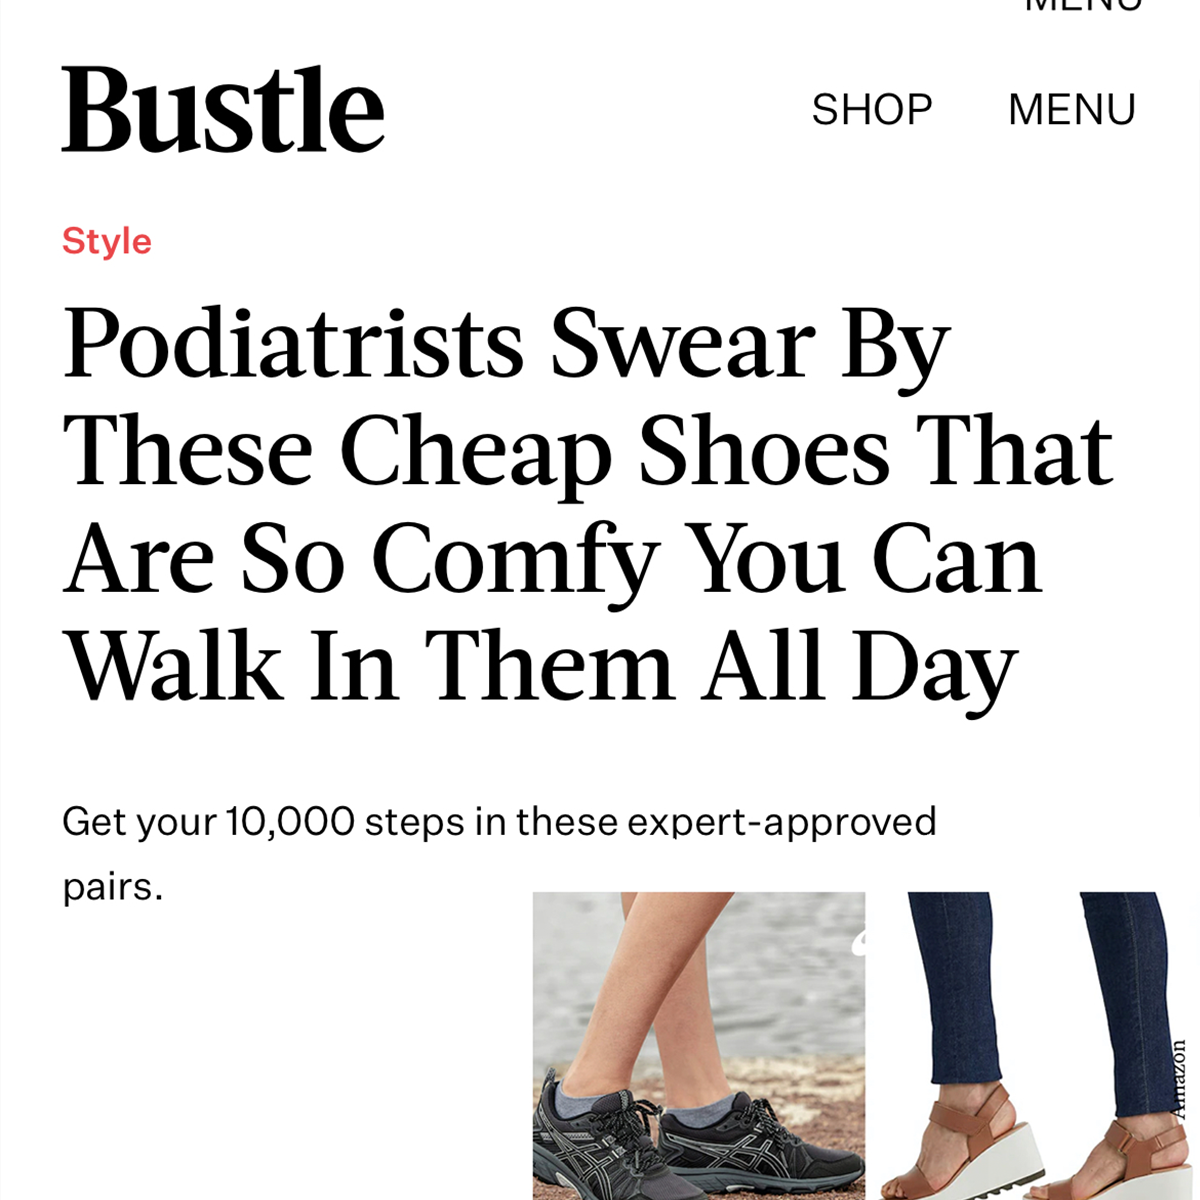 Bustle Press - Podriatrists Swear by these Cheak Shoes